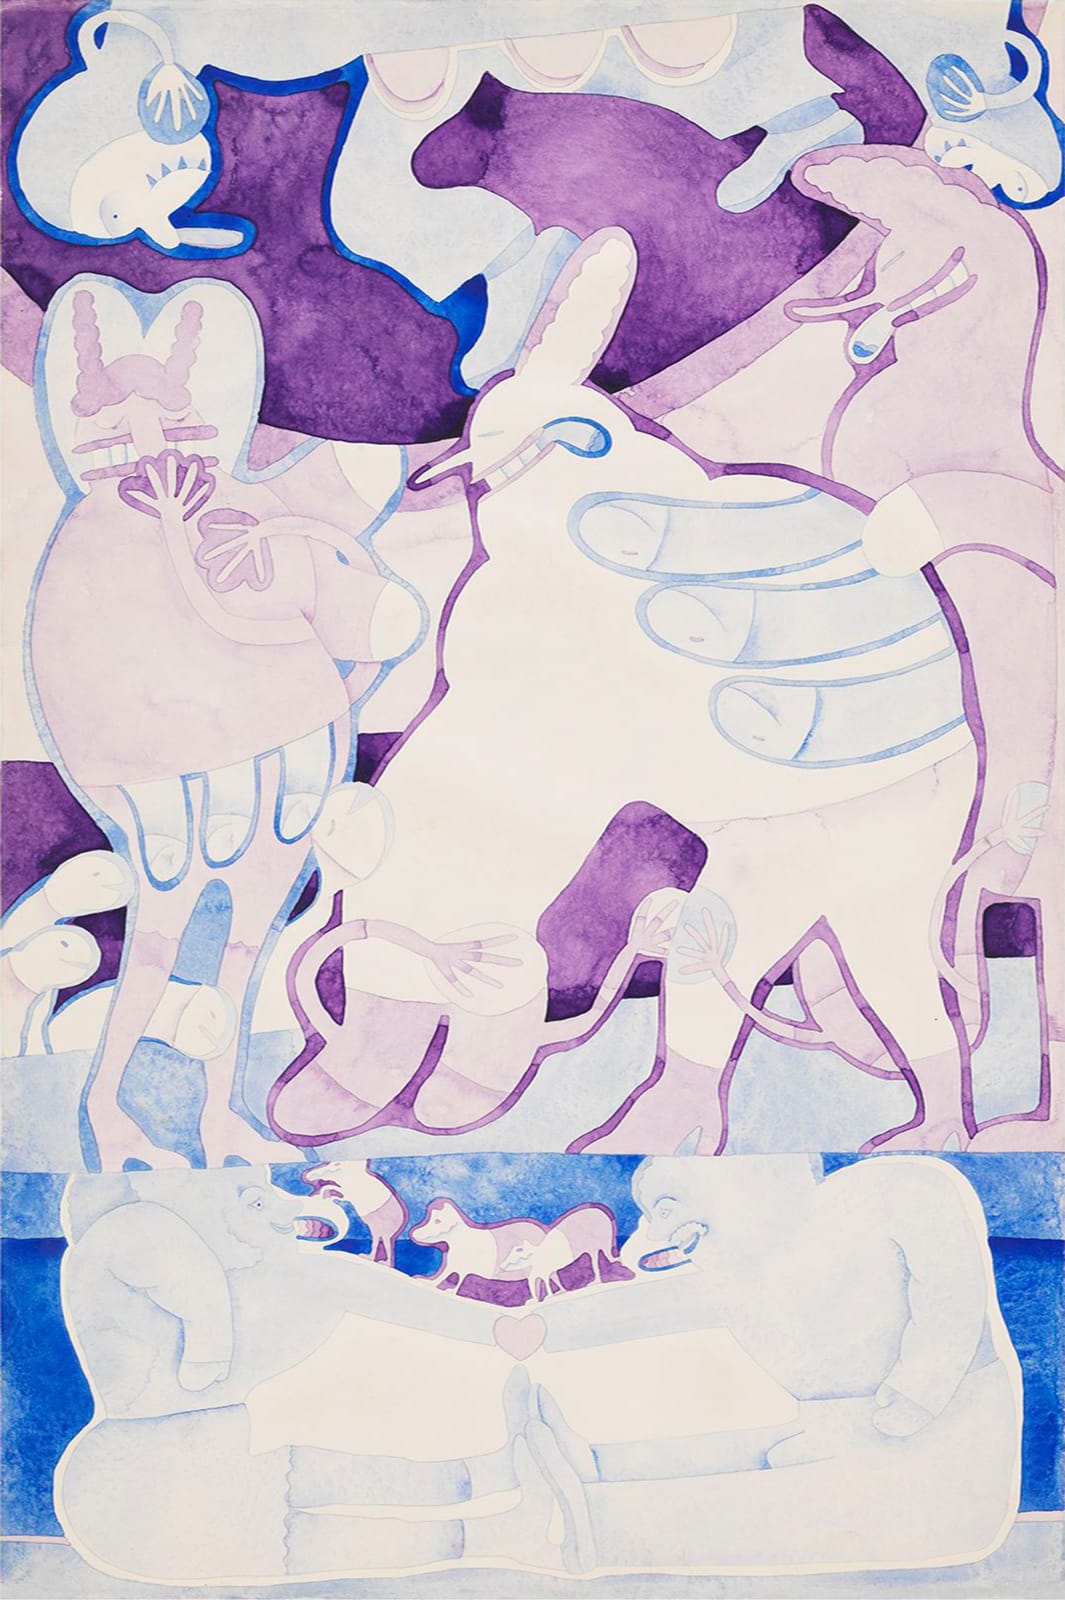 Gladys Nilsson, 2 Color Painting: Purple and Blue, 1969